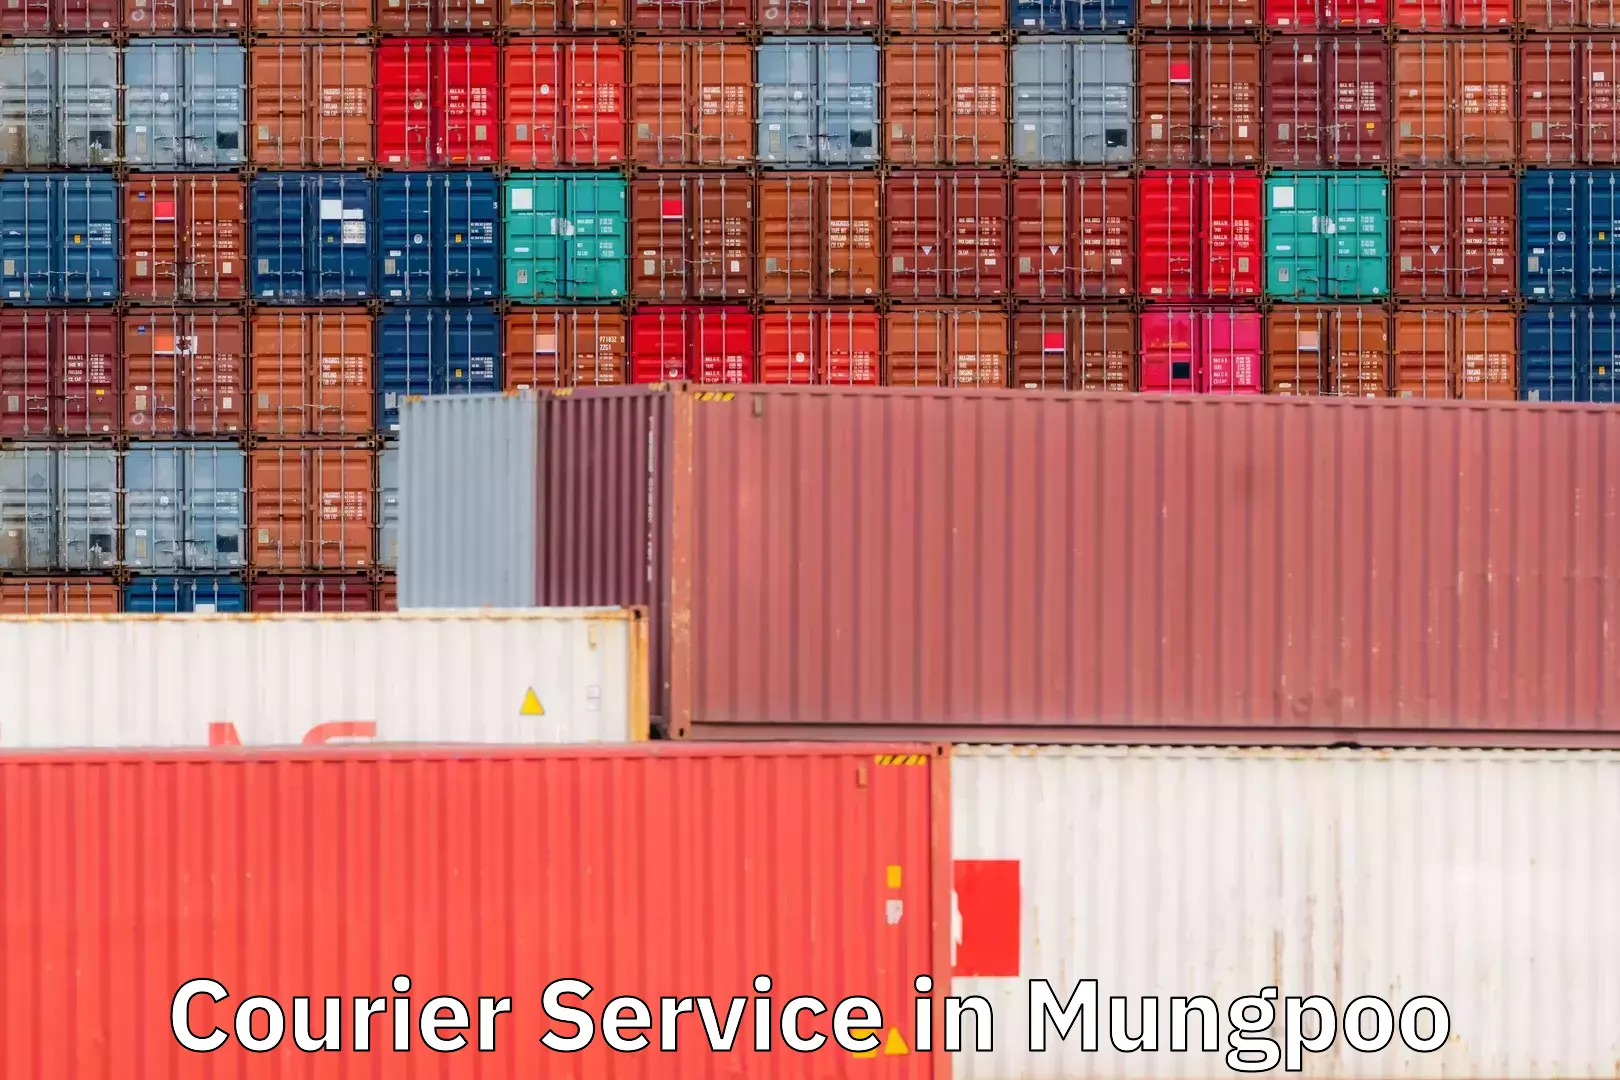 Business courier solutions in Mungpoo